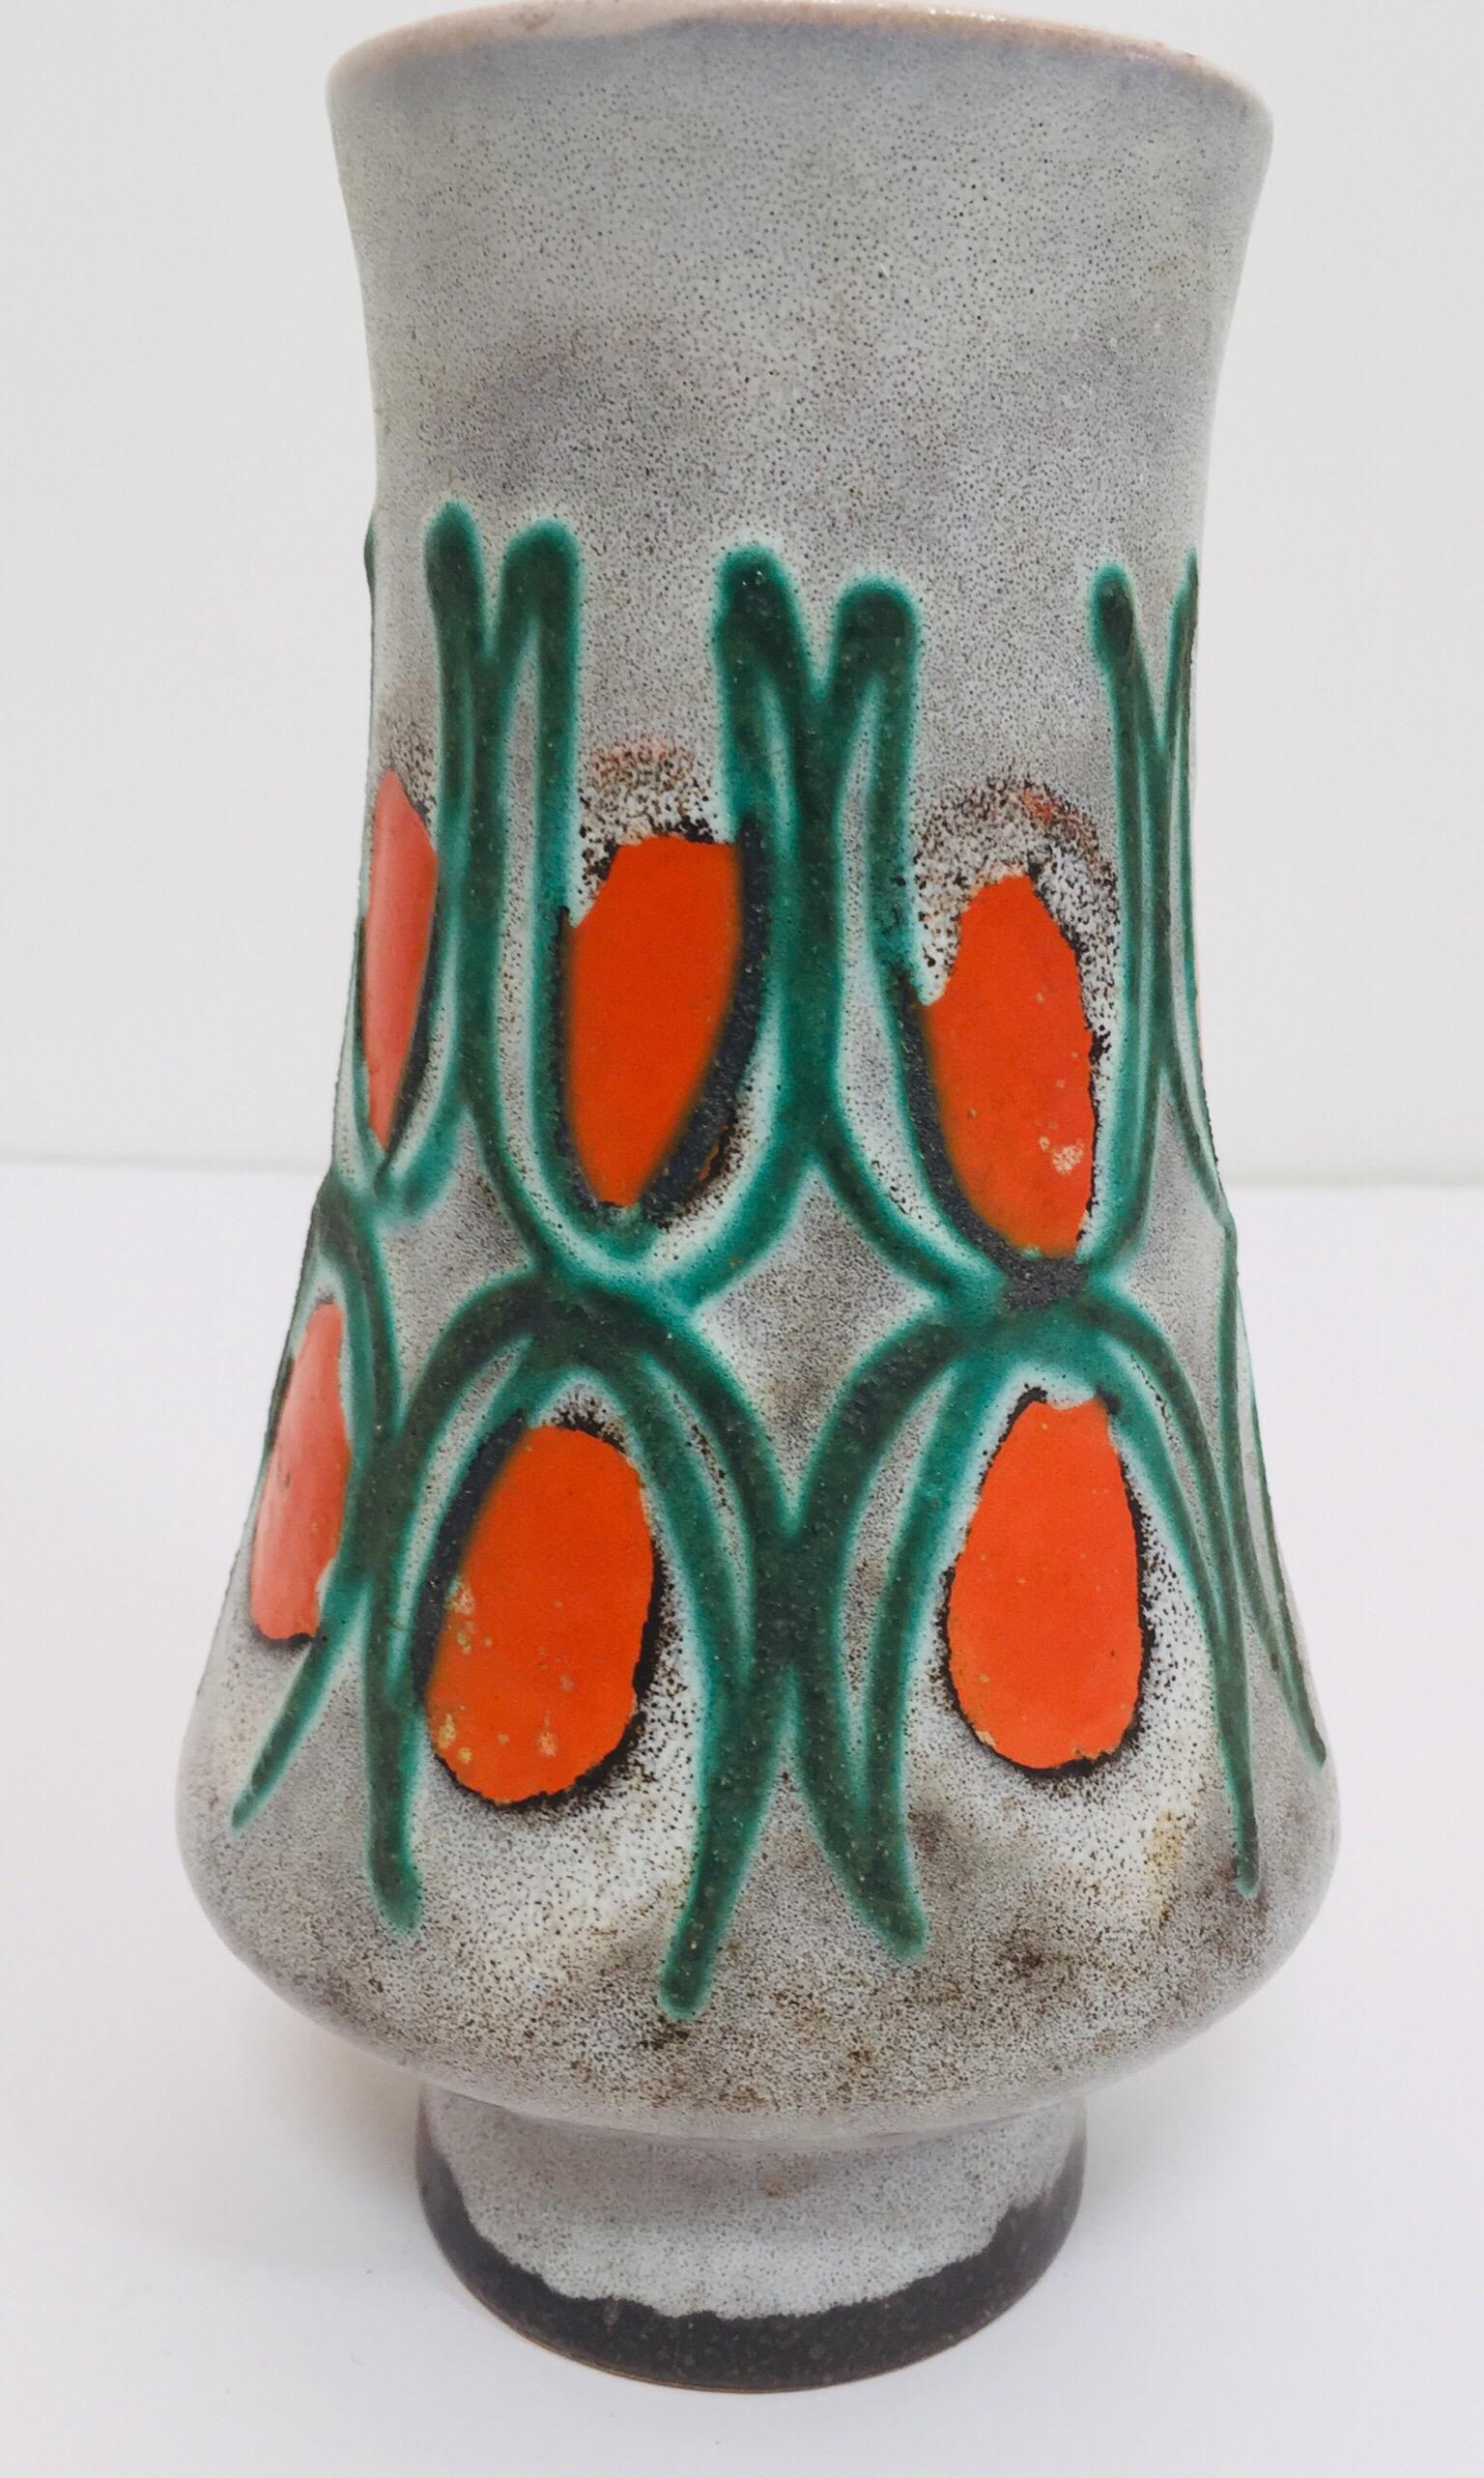 20th Century 1950s Midcentury Glazed Vase with Red and Green, Strehla East Germany GDR